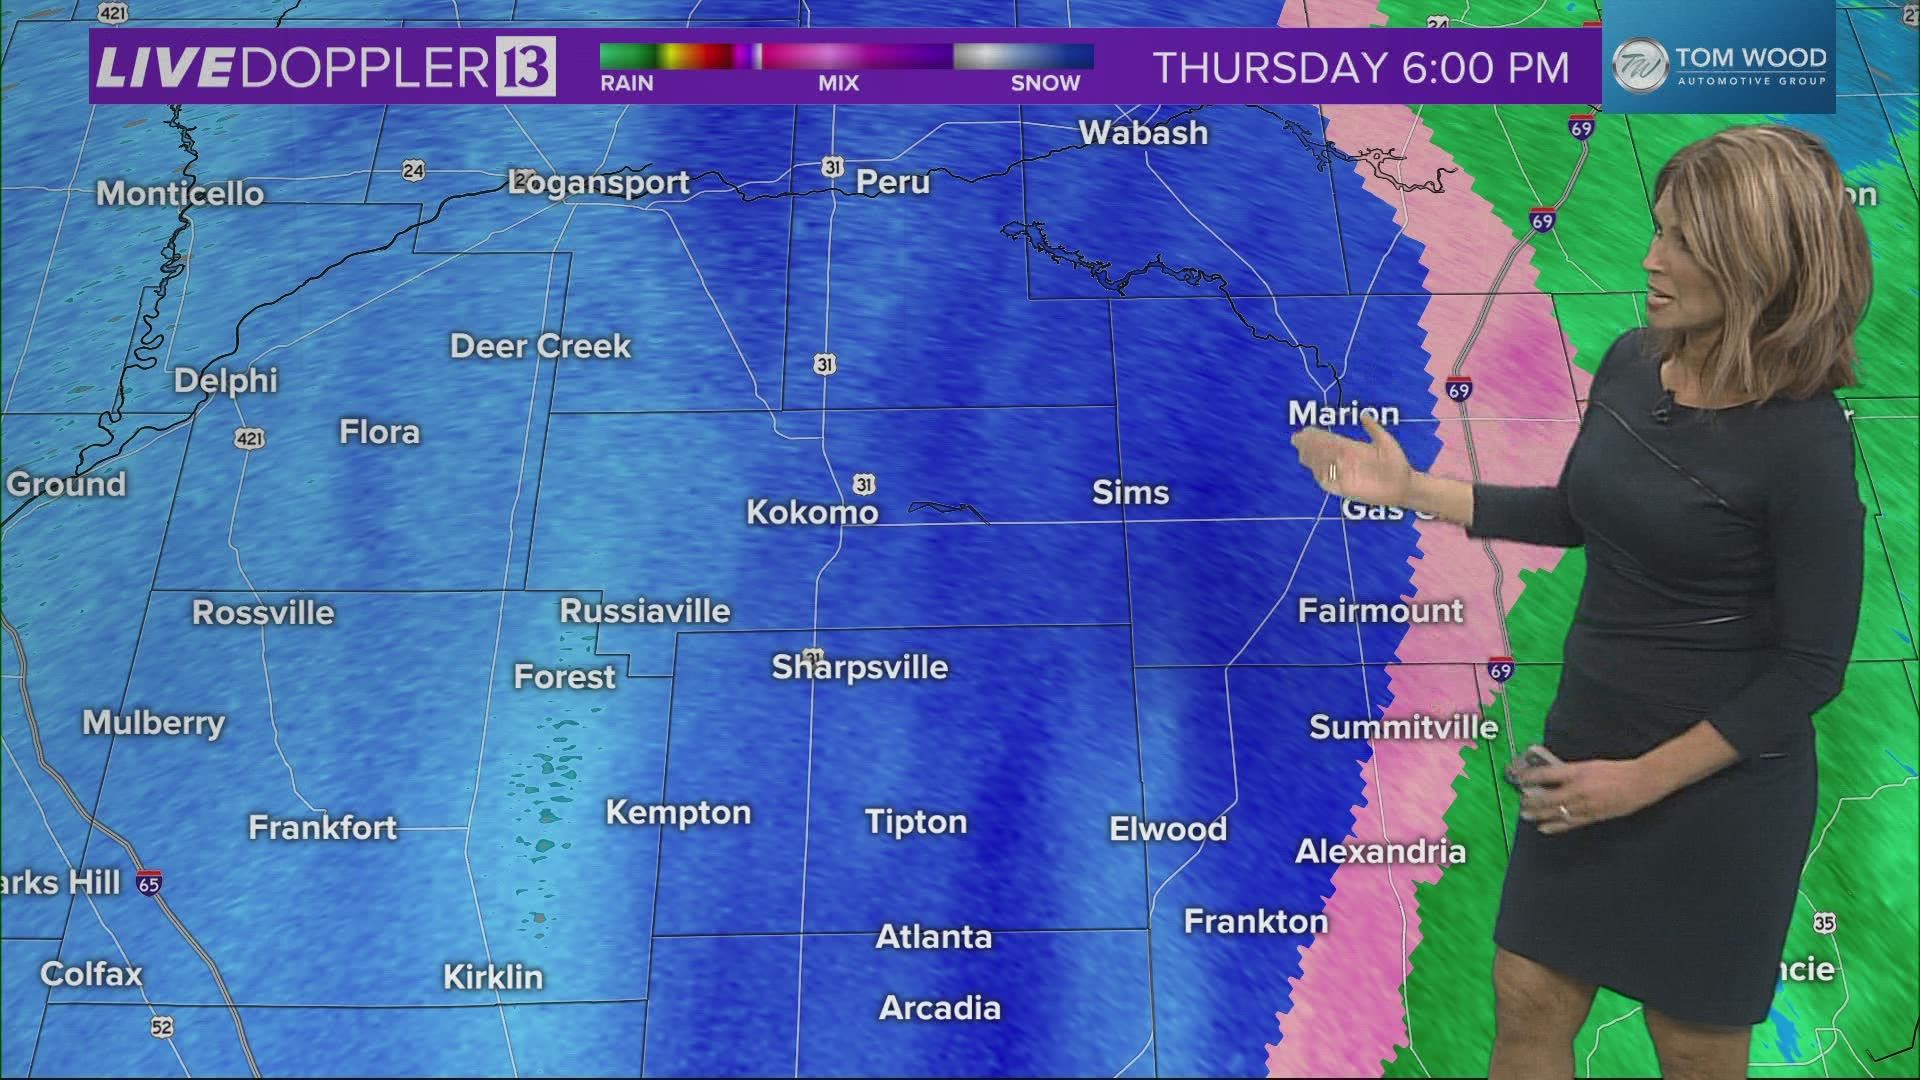 Our crews are tracking severe winter weather as it starts to hit central Indiana.